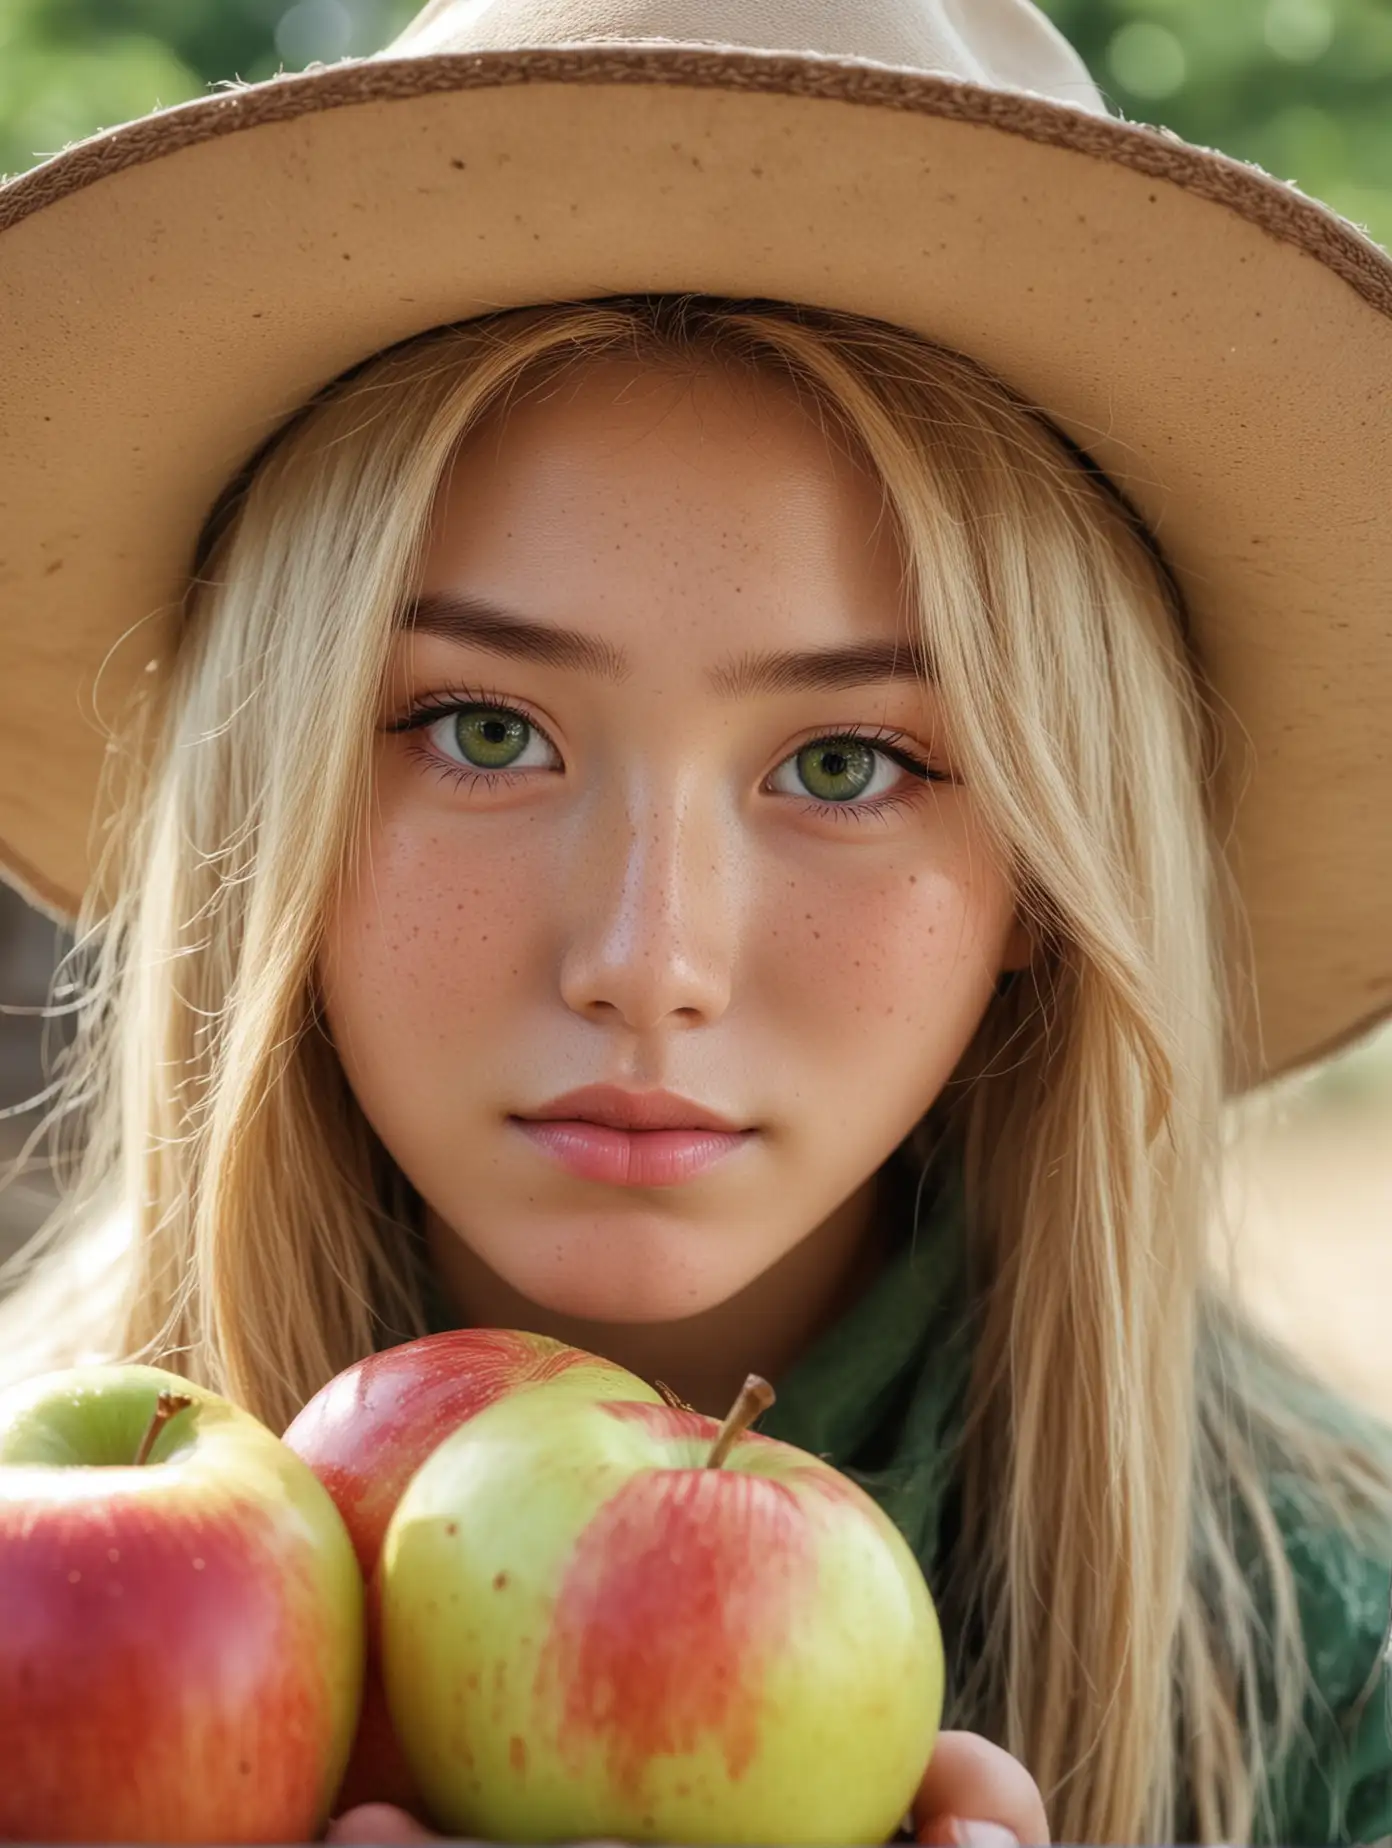 Blonde-Girl-with-Cowboy-Hat-Picking-Apples-in-Village-Setting